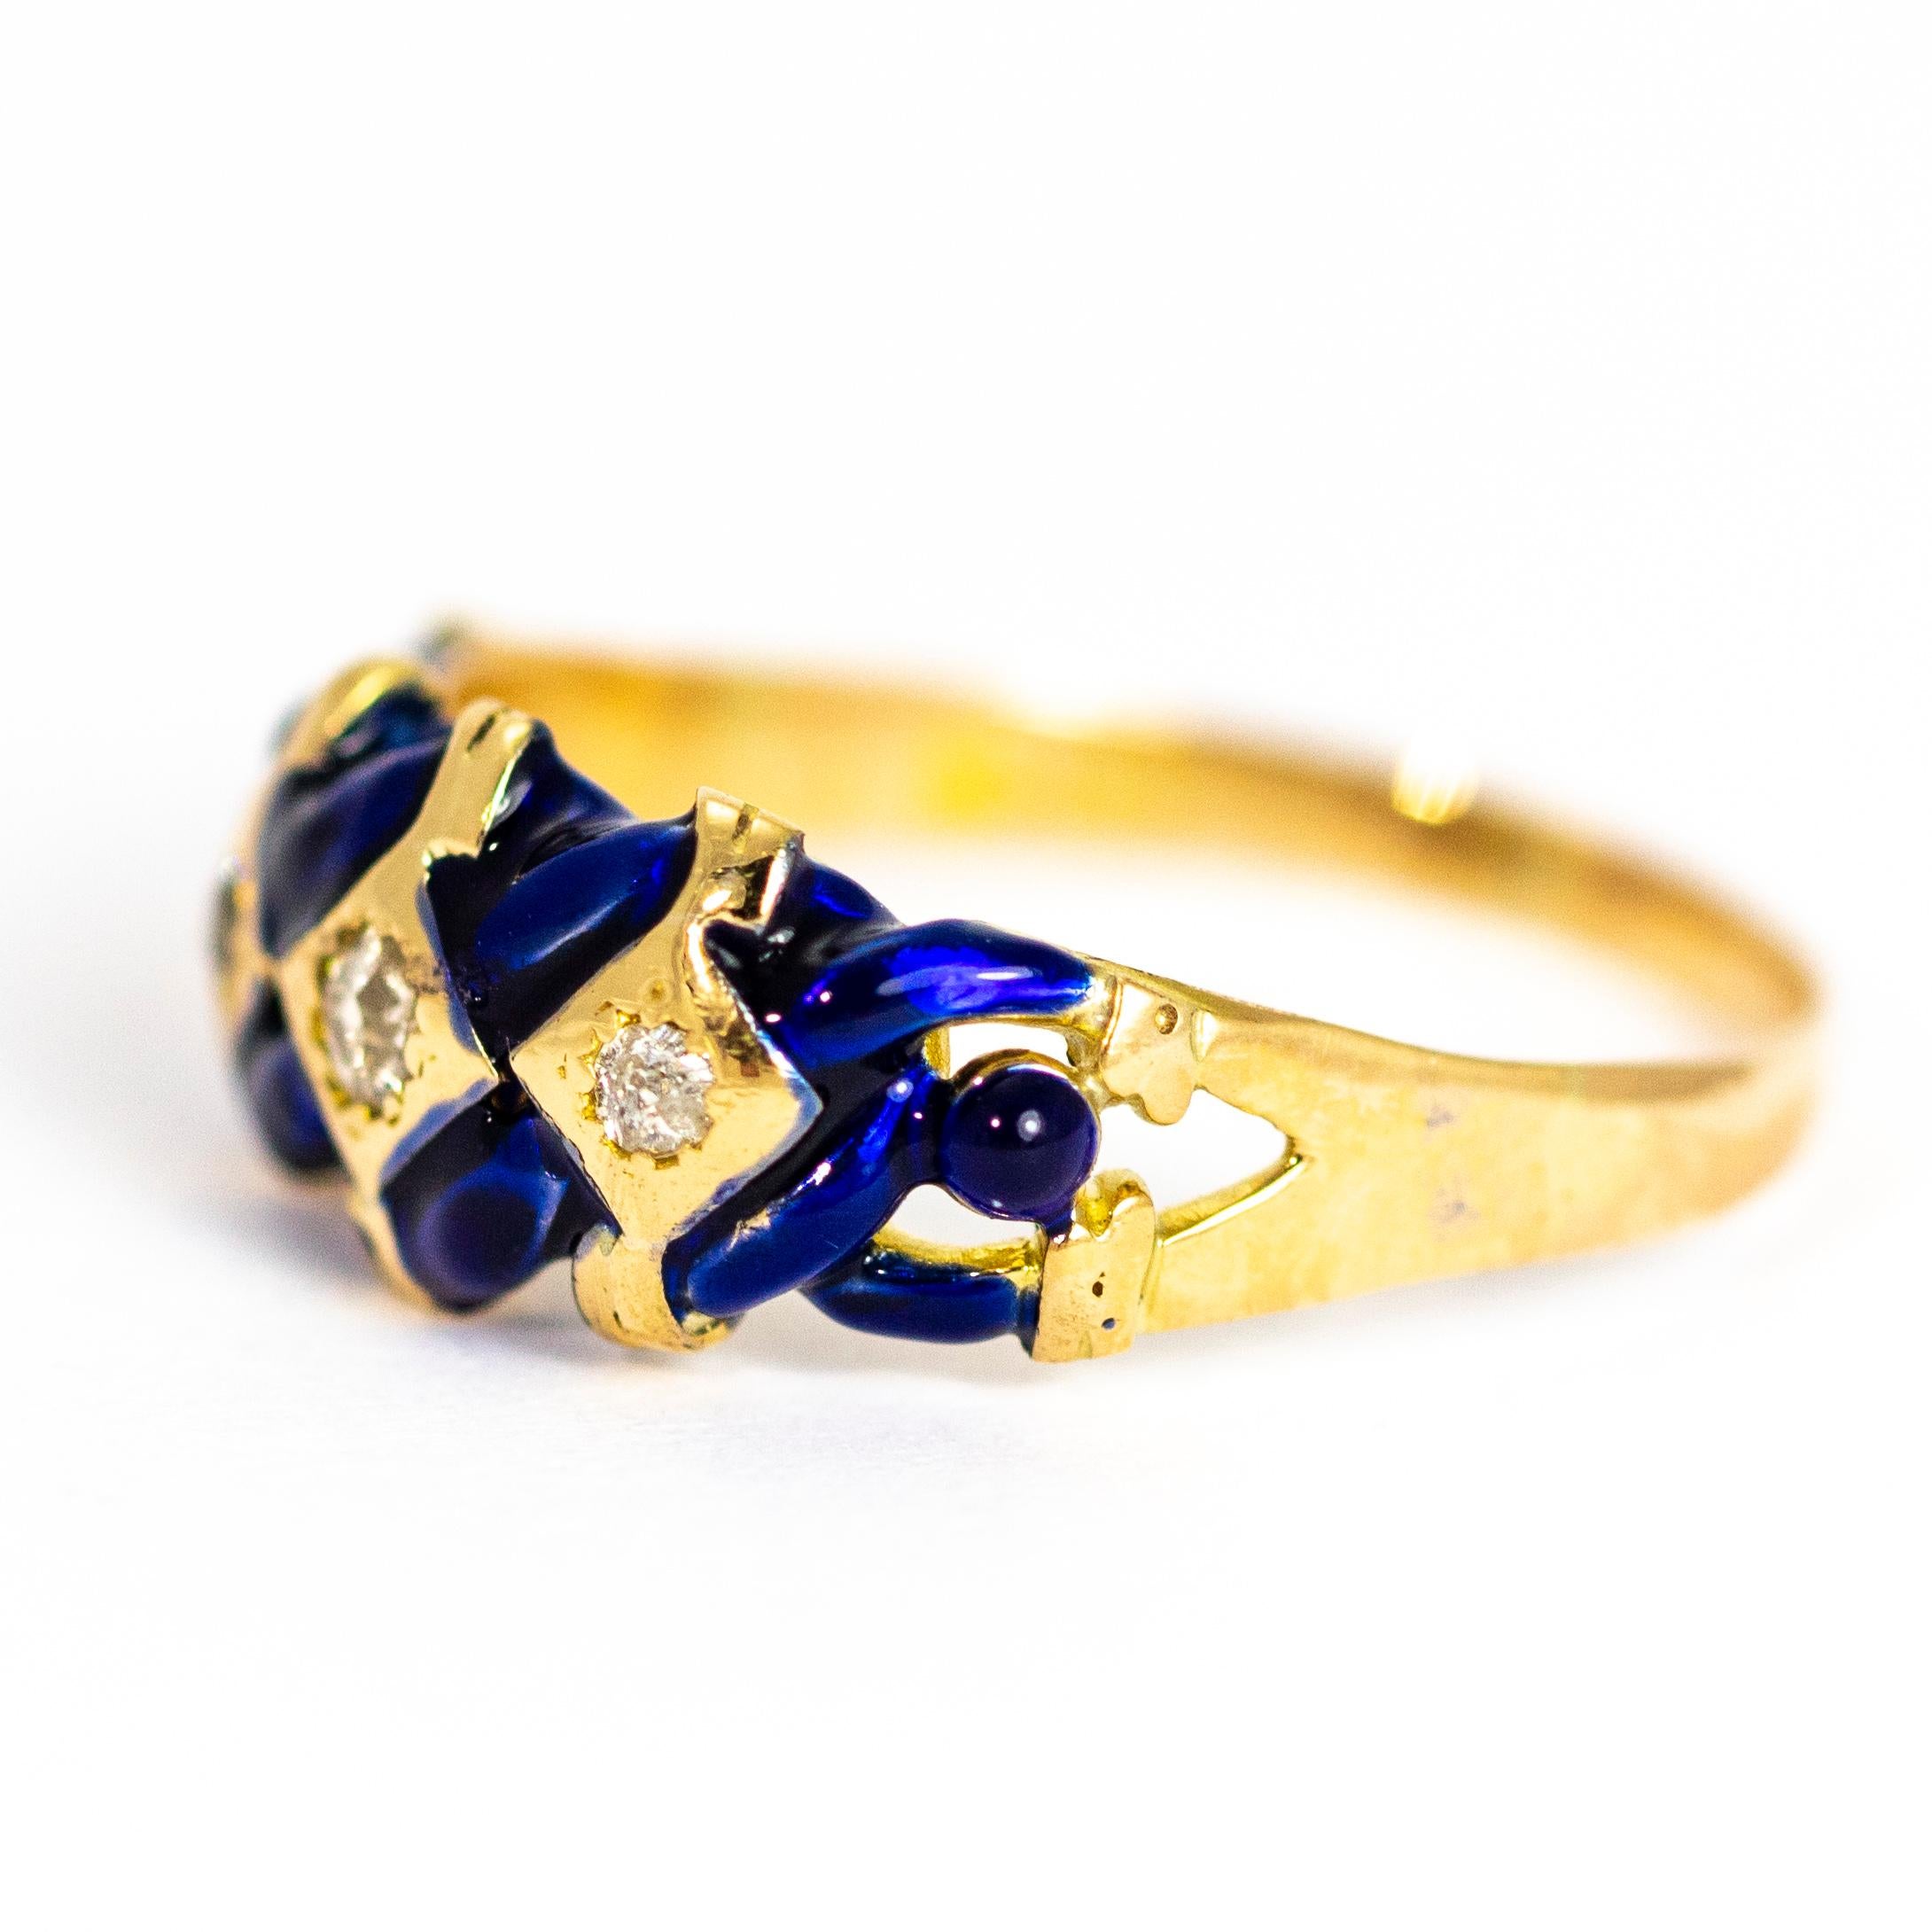 The three old European cut diamonds in this ring sparkle in gold square settings which has deep blue enamel woven around the gold. Modelled in 15ct gold and made in Chester, England.

Ring Size: R 1/2 or 9
Band Width: 8.5mm